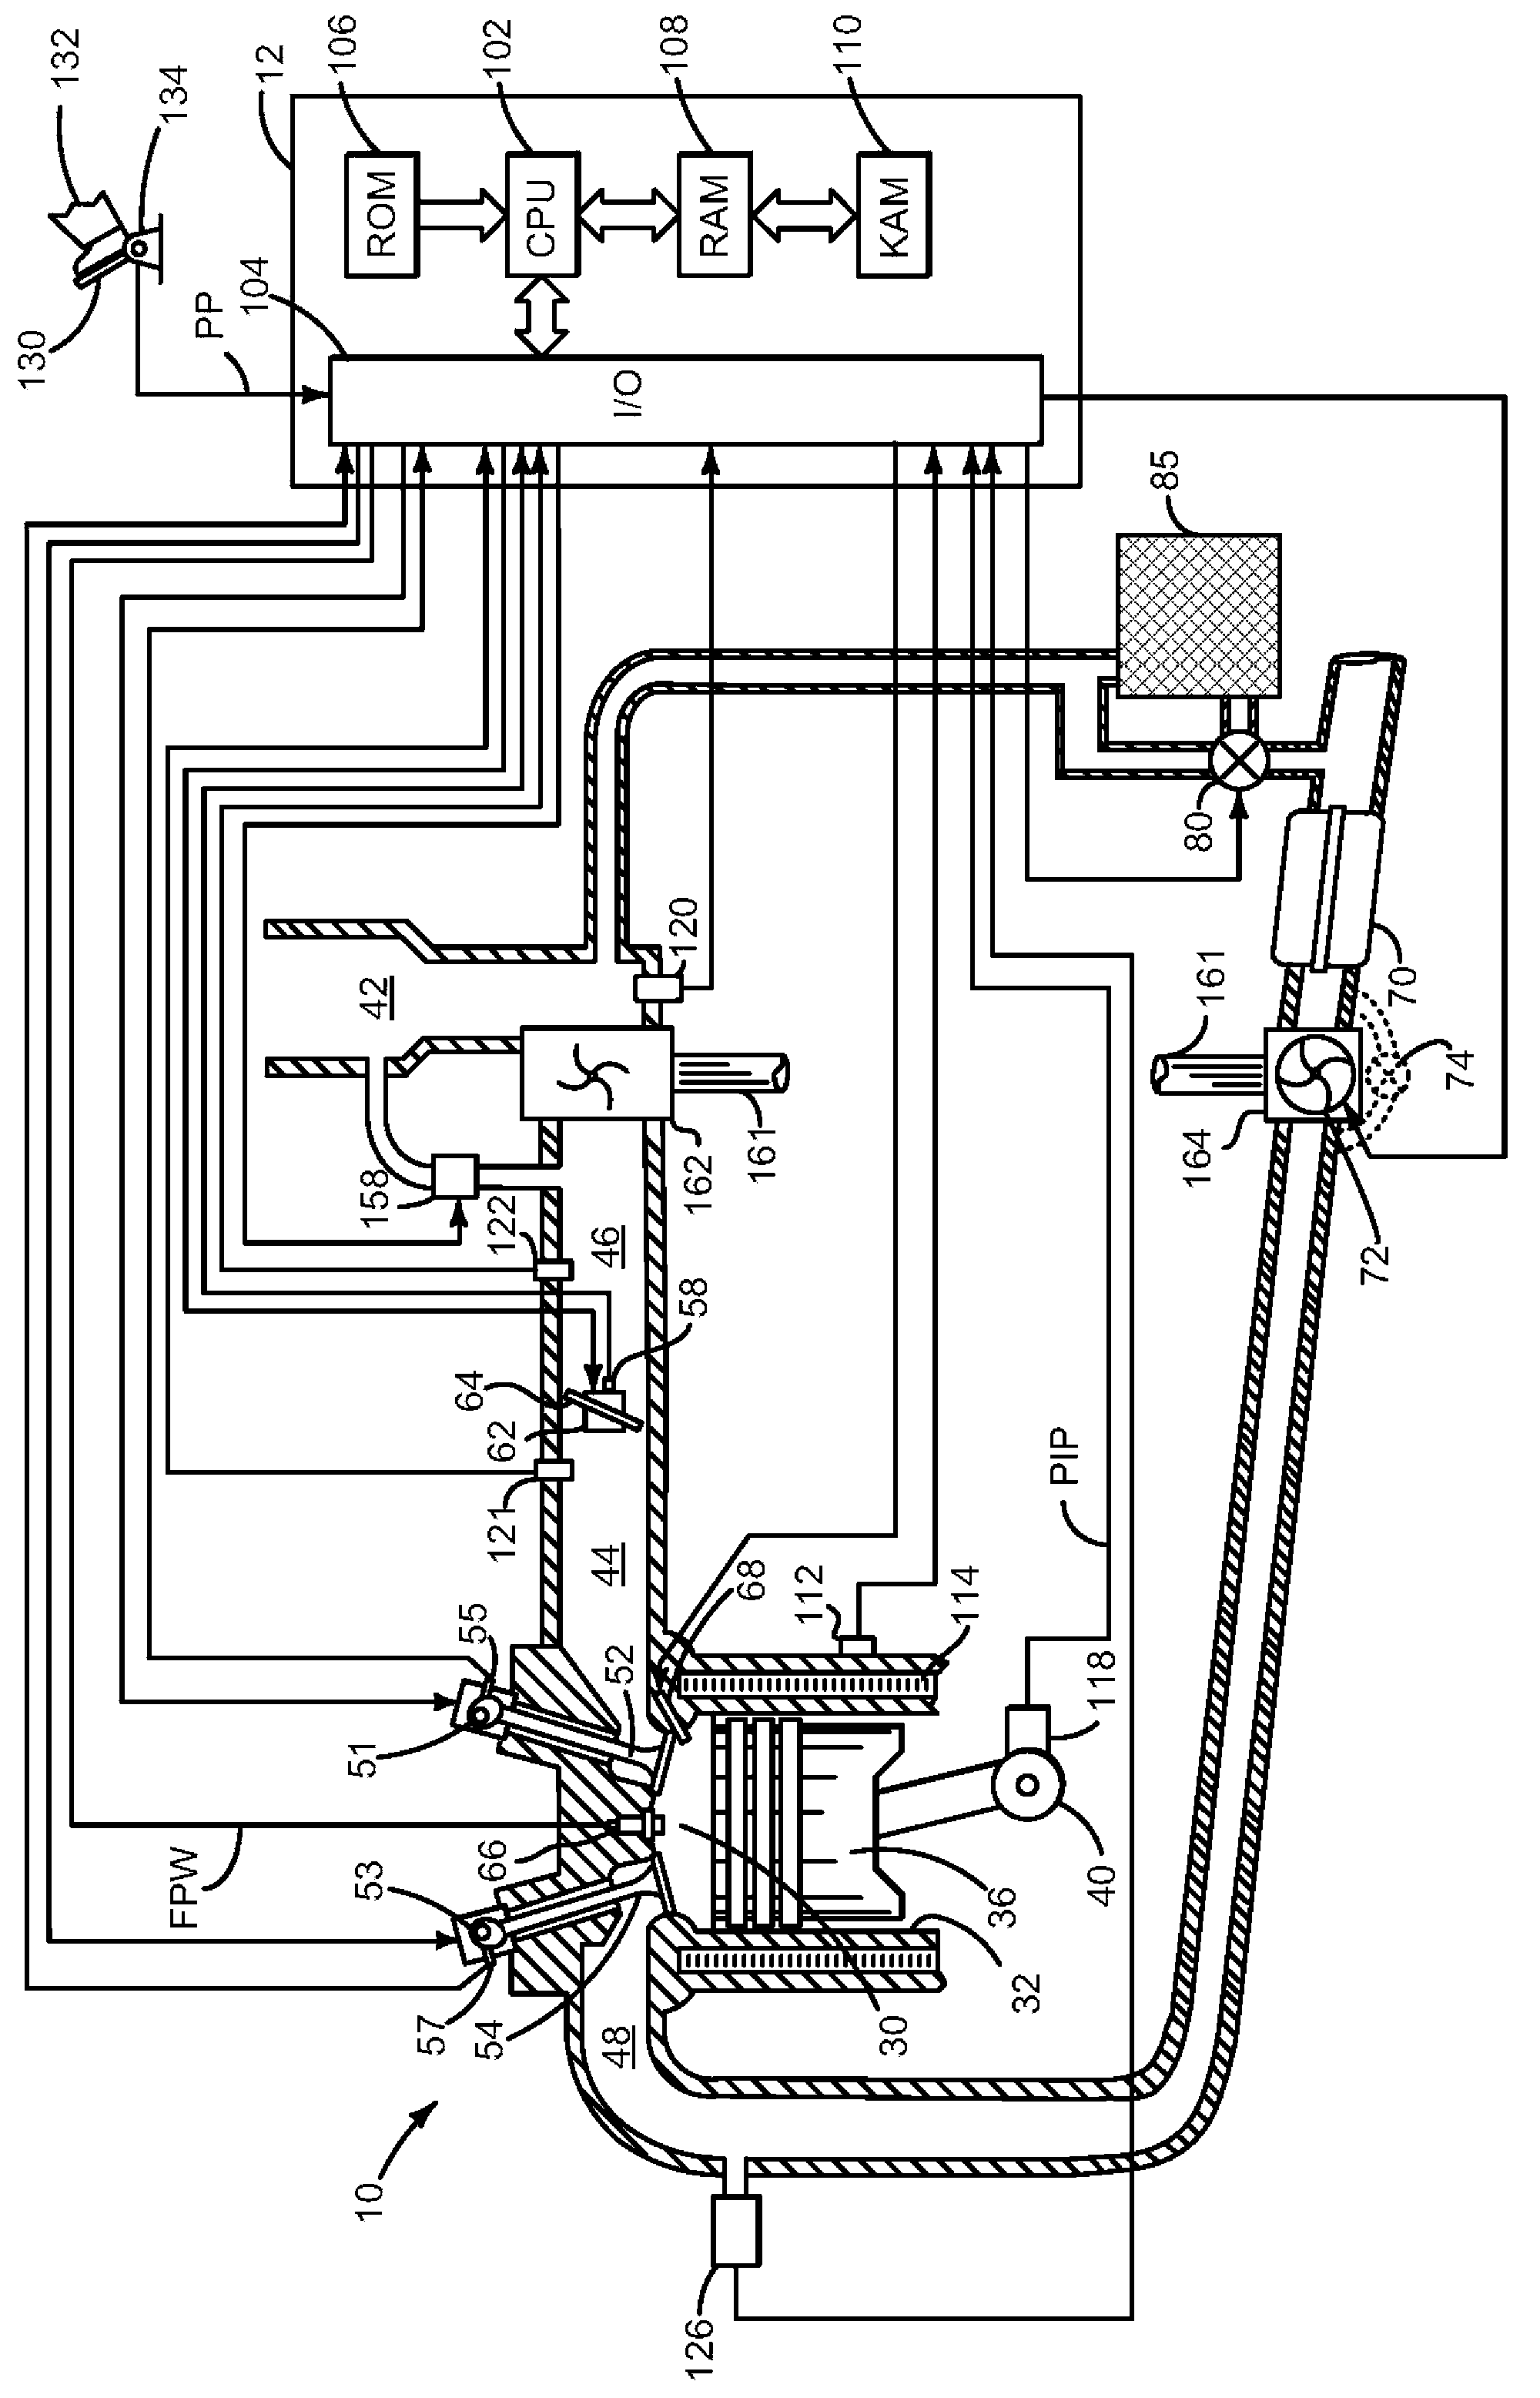 System and method for injecting fuel